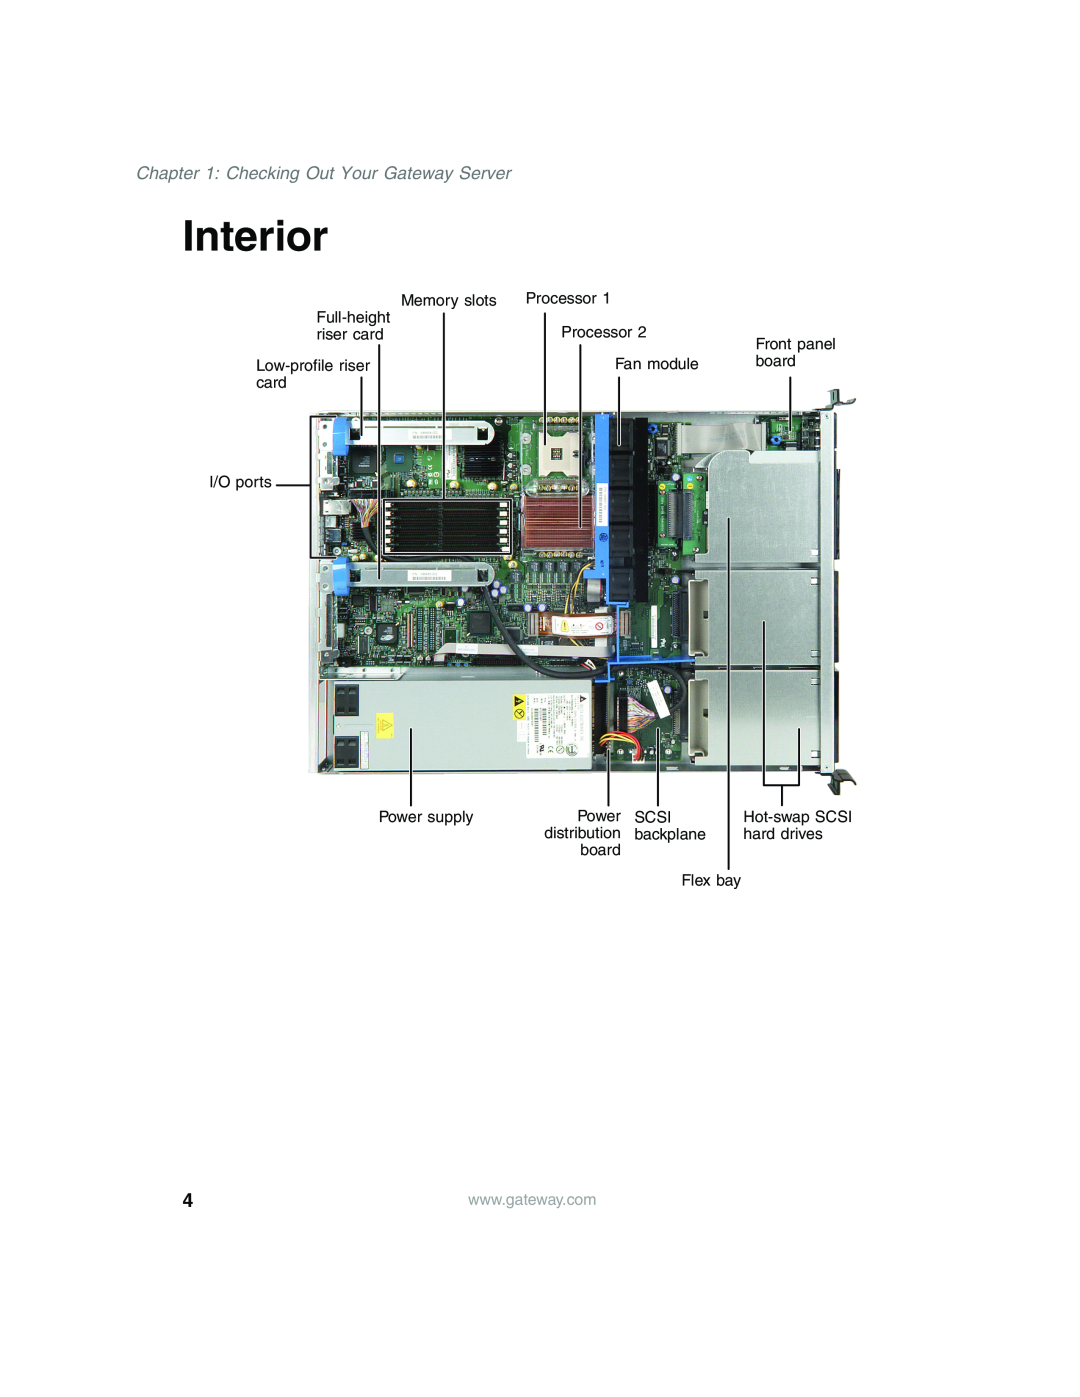 Gateway 955 manual Interior, Checking Out Your Gateway Server, Power supply, board Flex bay 